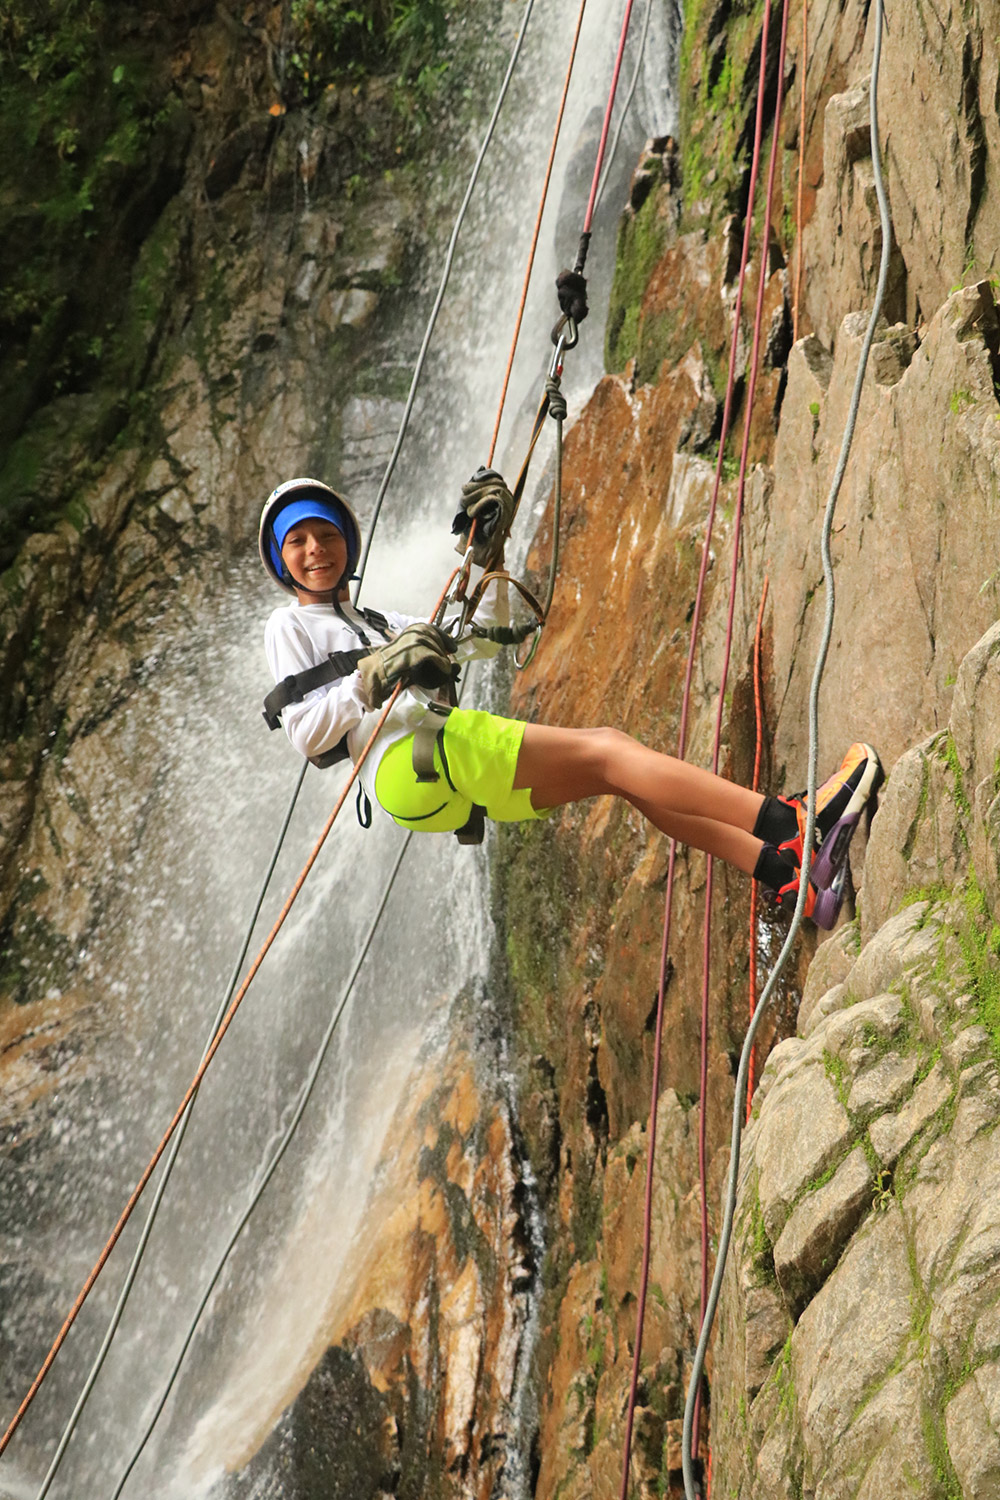 Oliver rappels down steep rocks surrounded by rushing waterfalls in Mexico. August, 2021